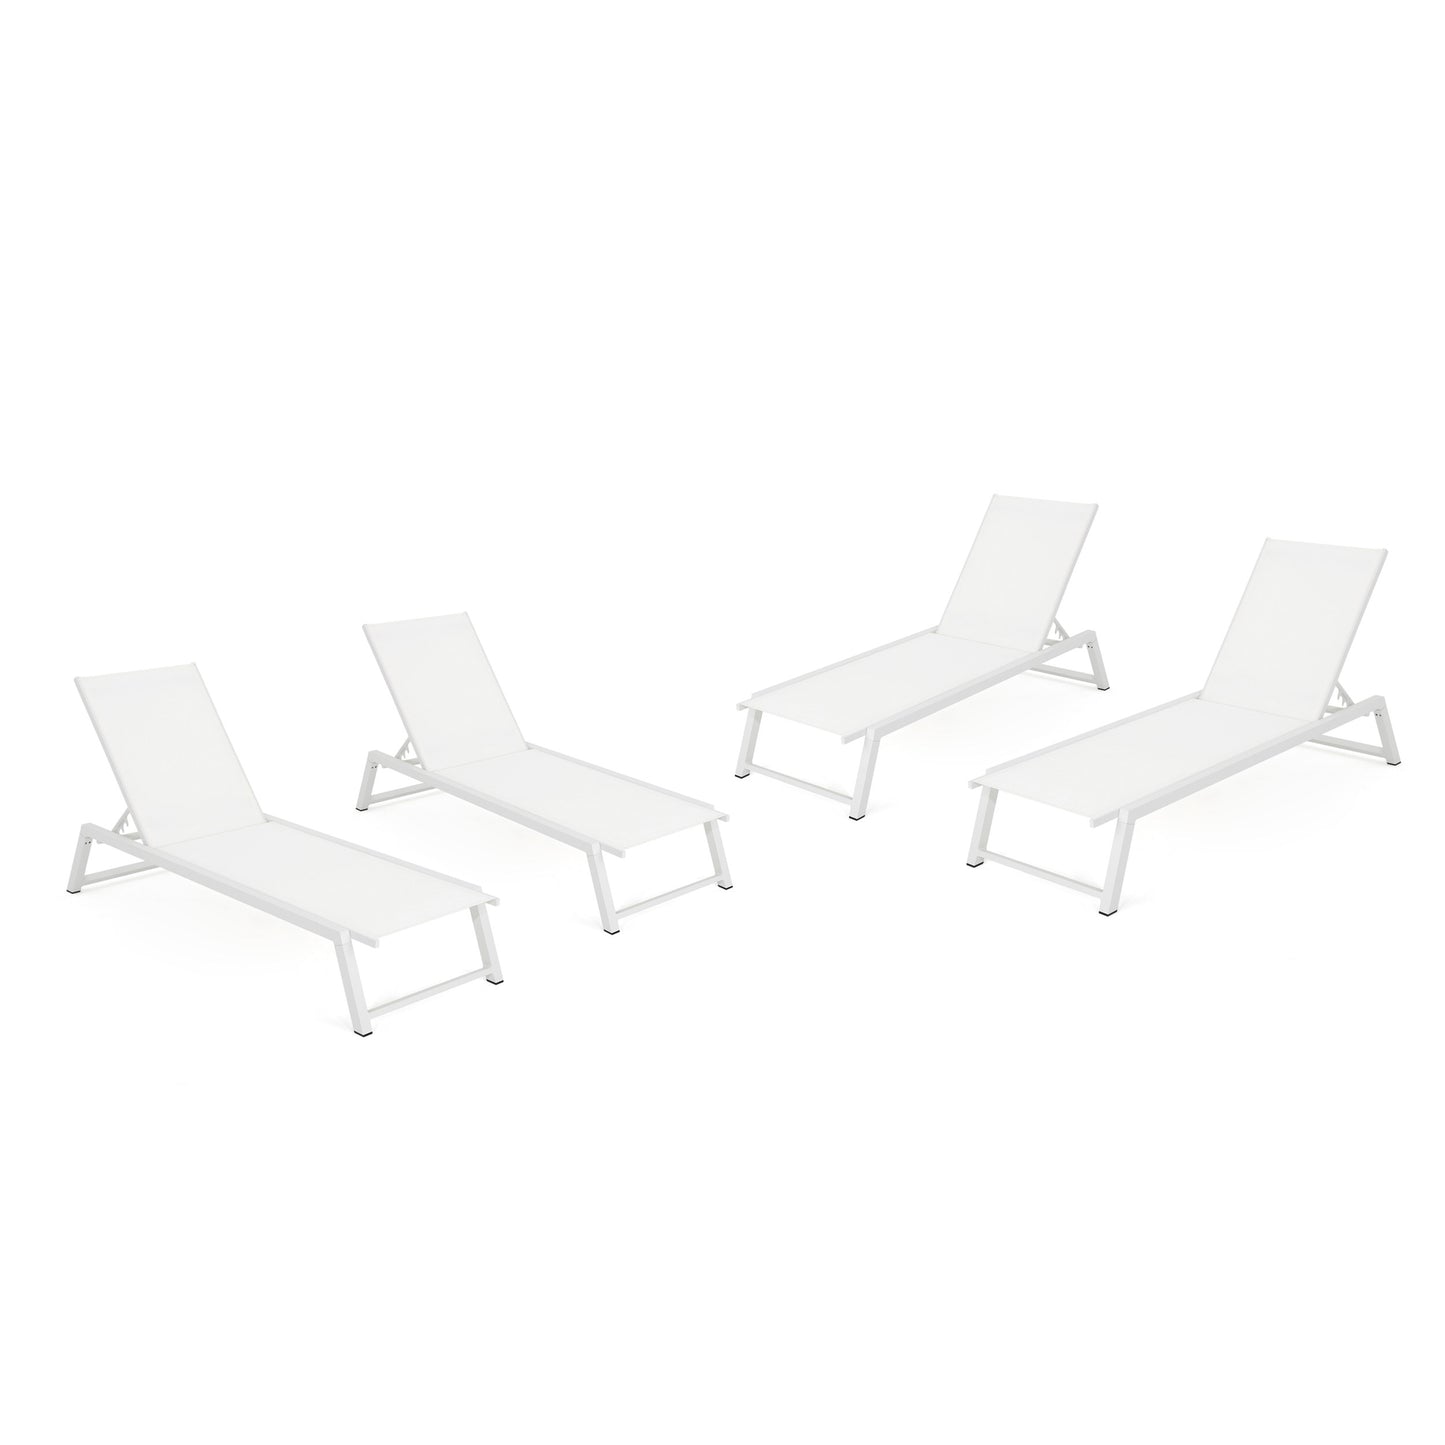 Mesa Outdoor Chaise Lounge with Finished Aluminum Frame (Set of 2)